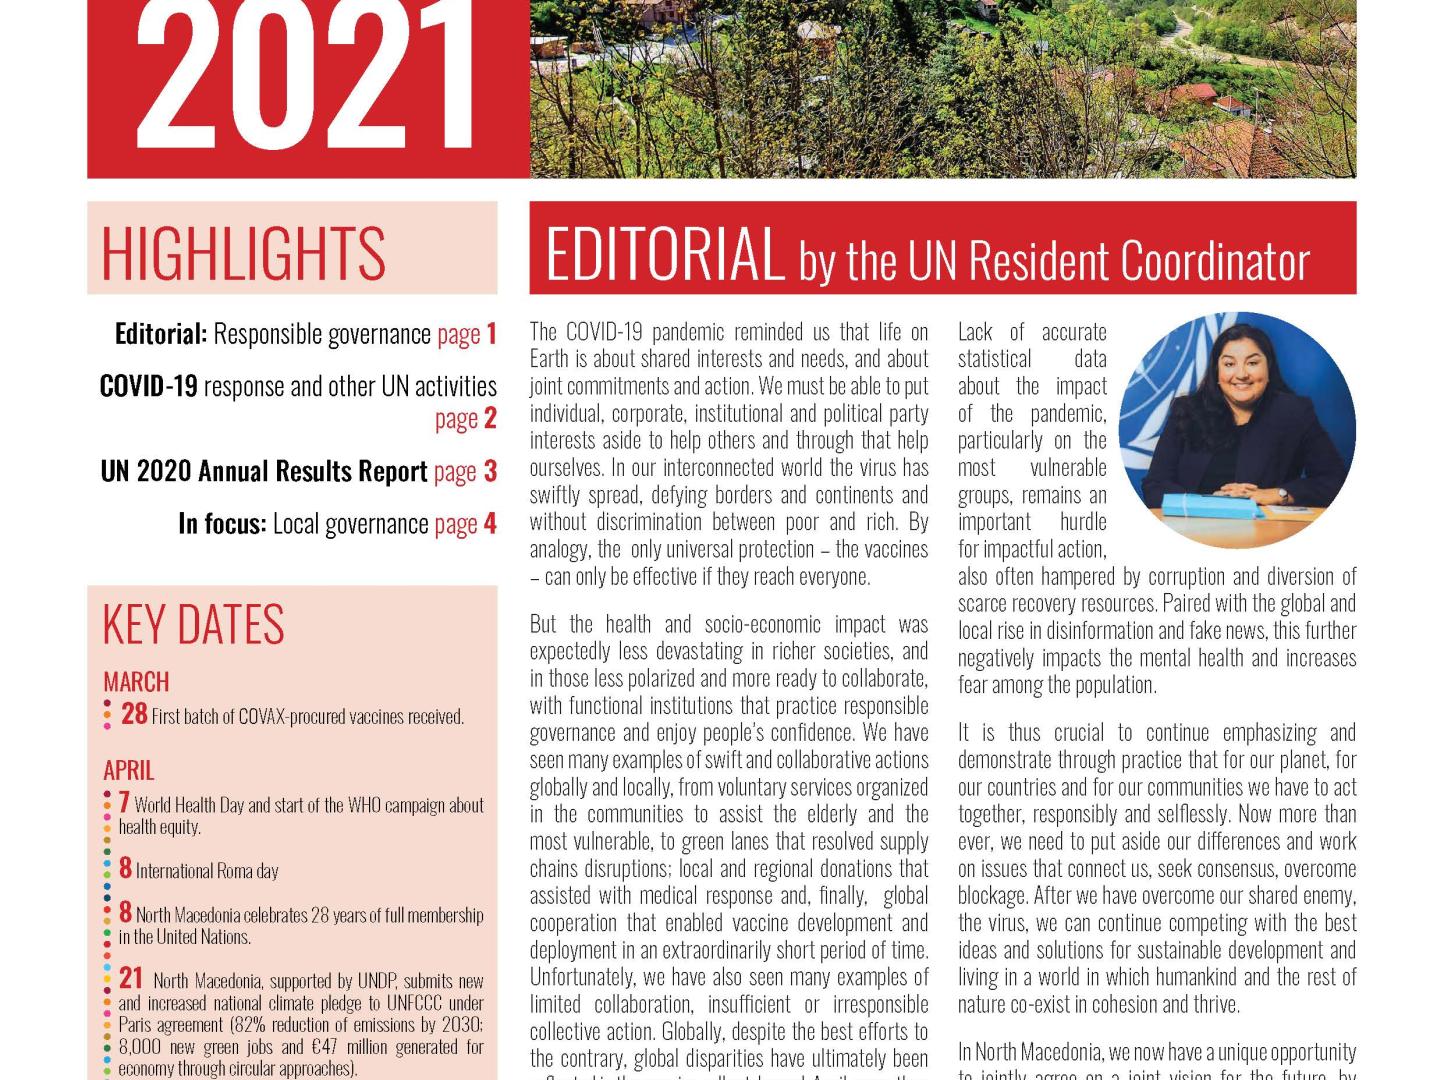 A front page of the Sustainable Development Bulletin for April 2021